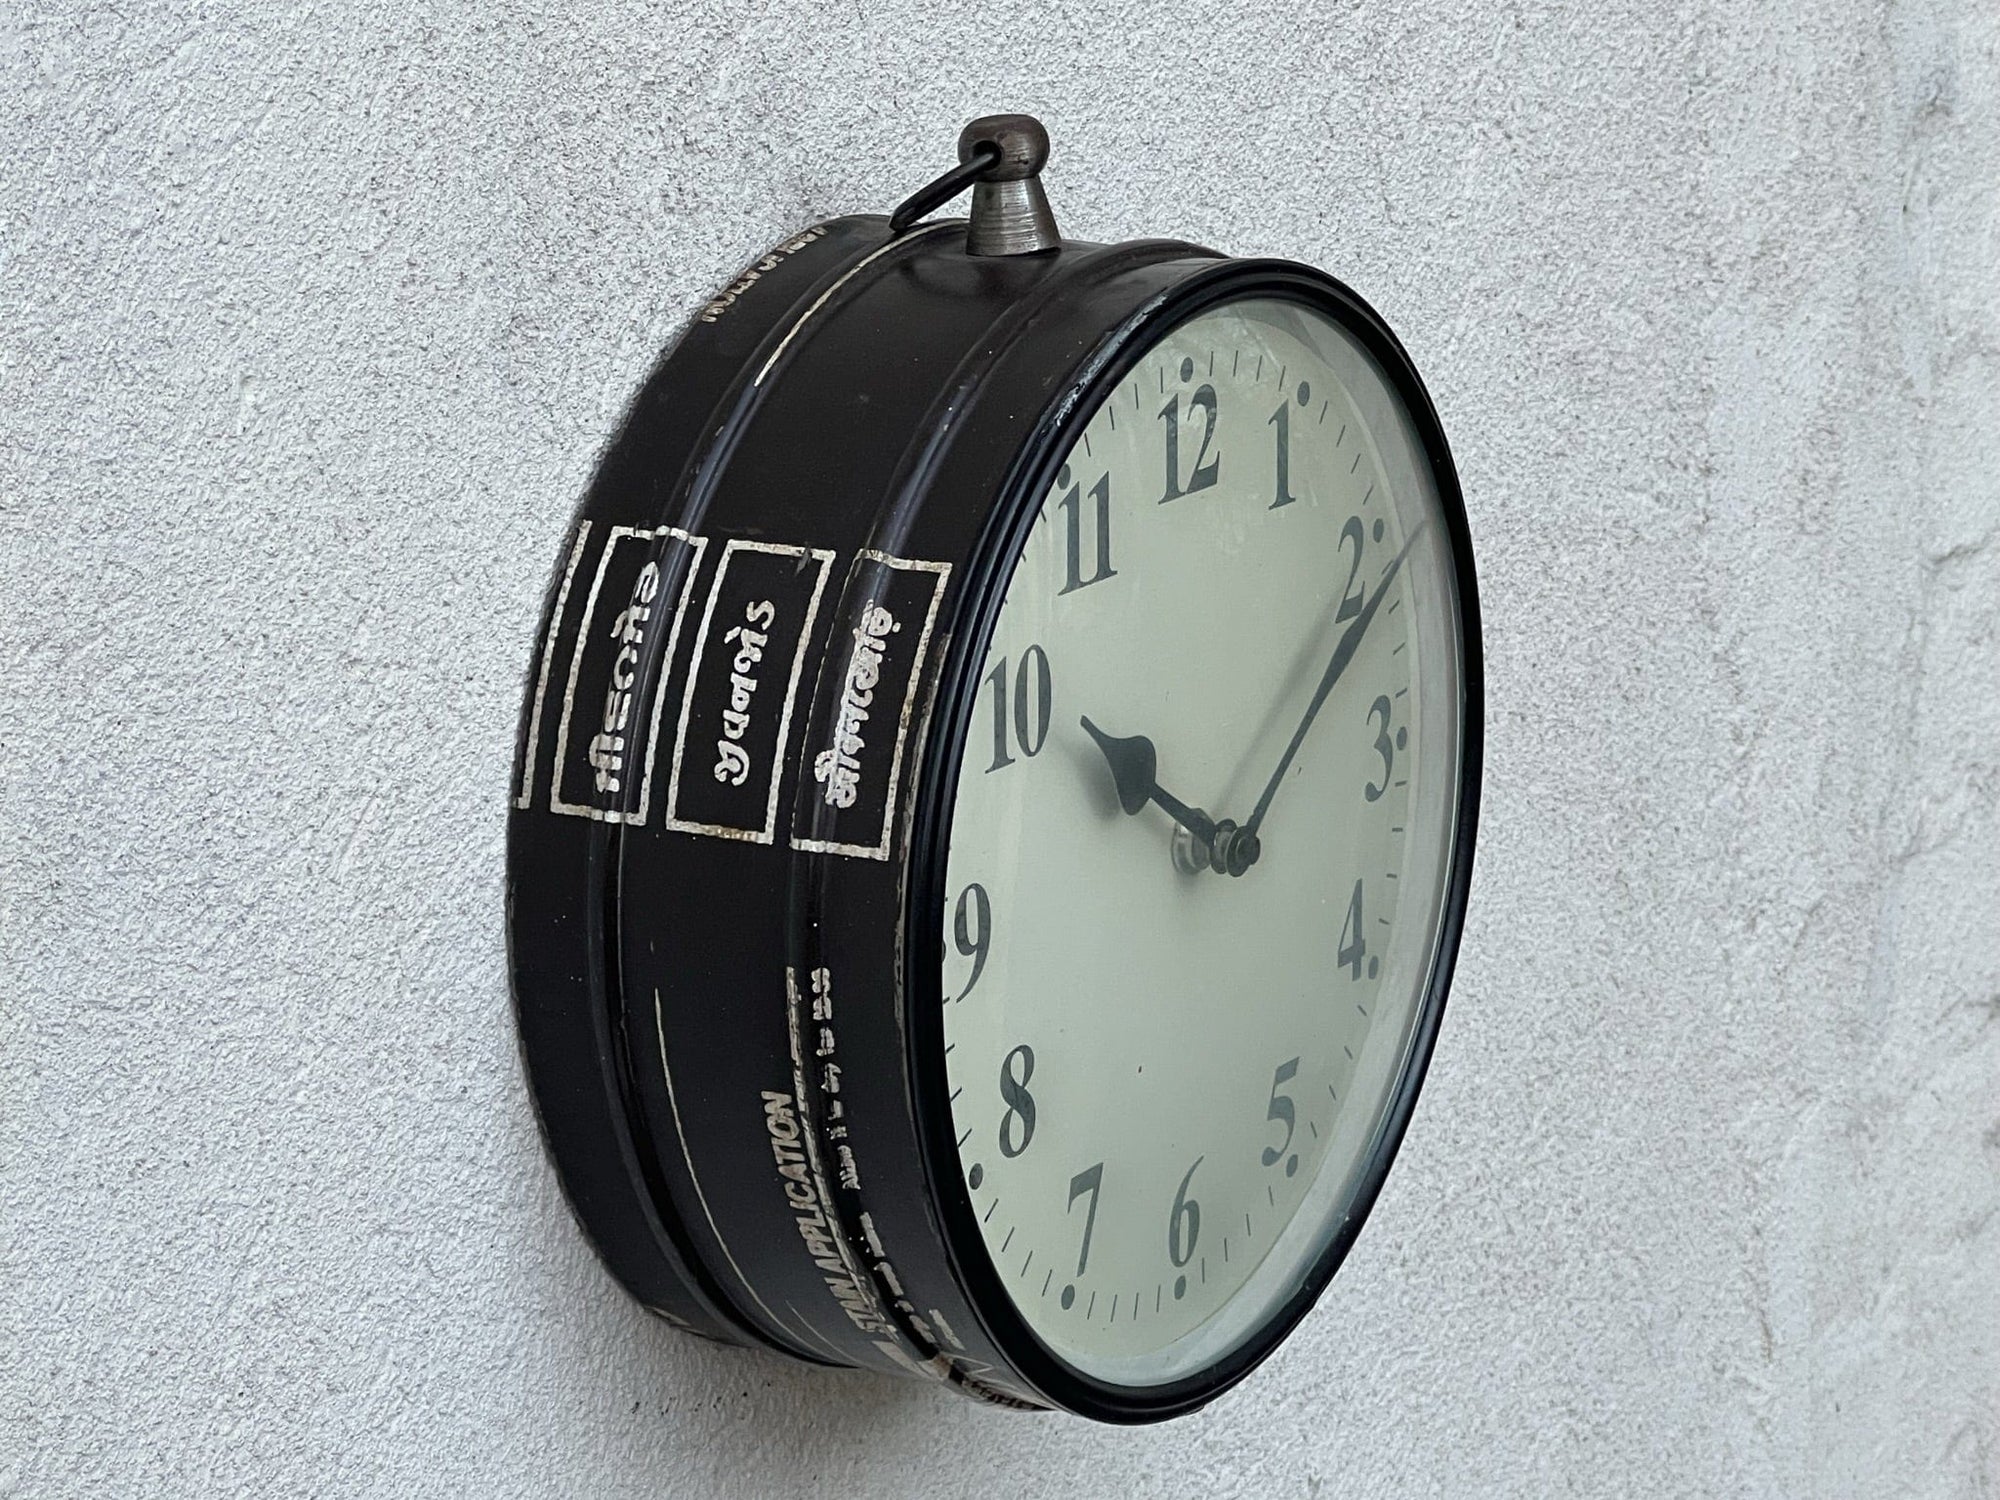 I Like Mike's Mid Century Modern Wall Clocks Round Reclaimed Metal Wall Clock, Upcycled Industrial Chic